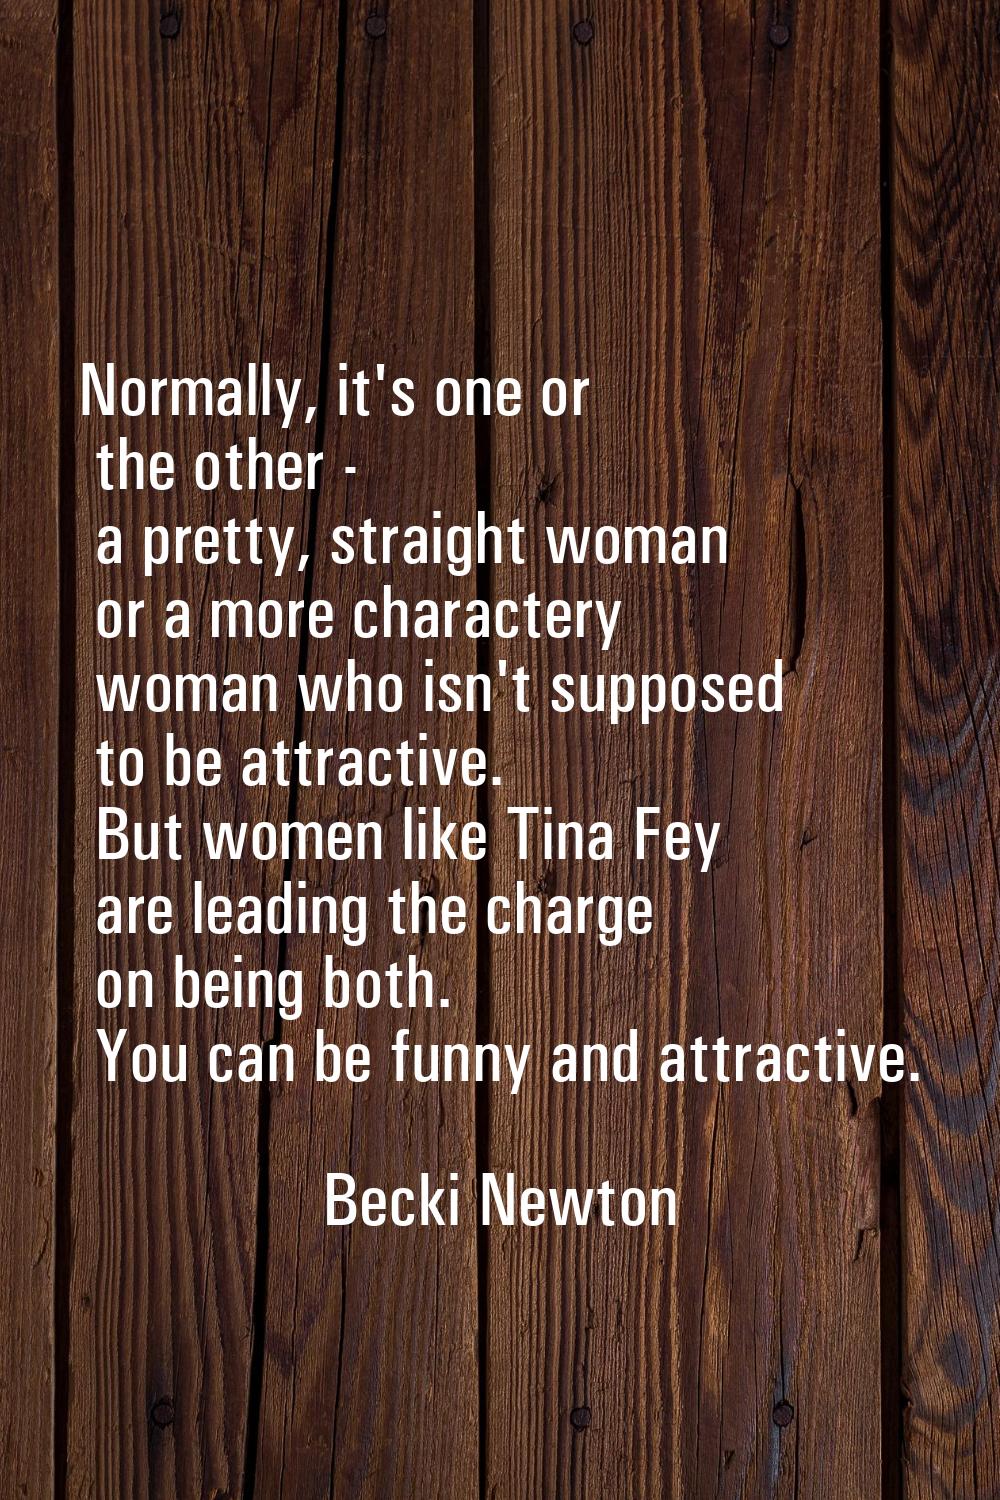 Normally, it's one or the other - a pretty, straight woman or a more charactery woman who isn't sup